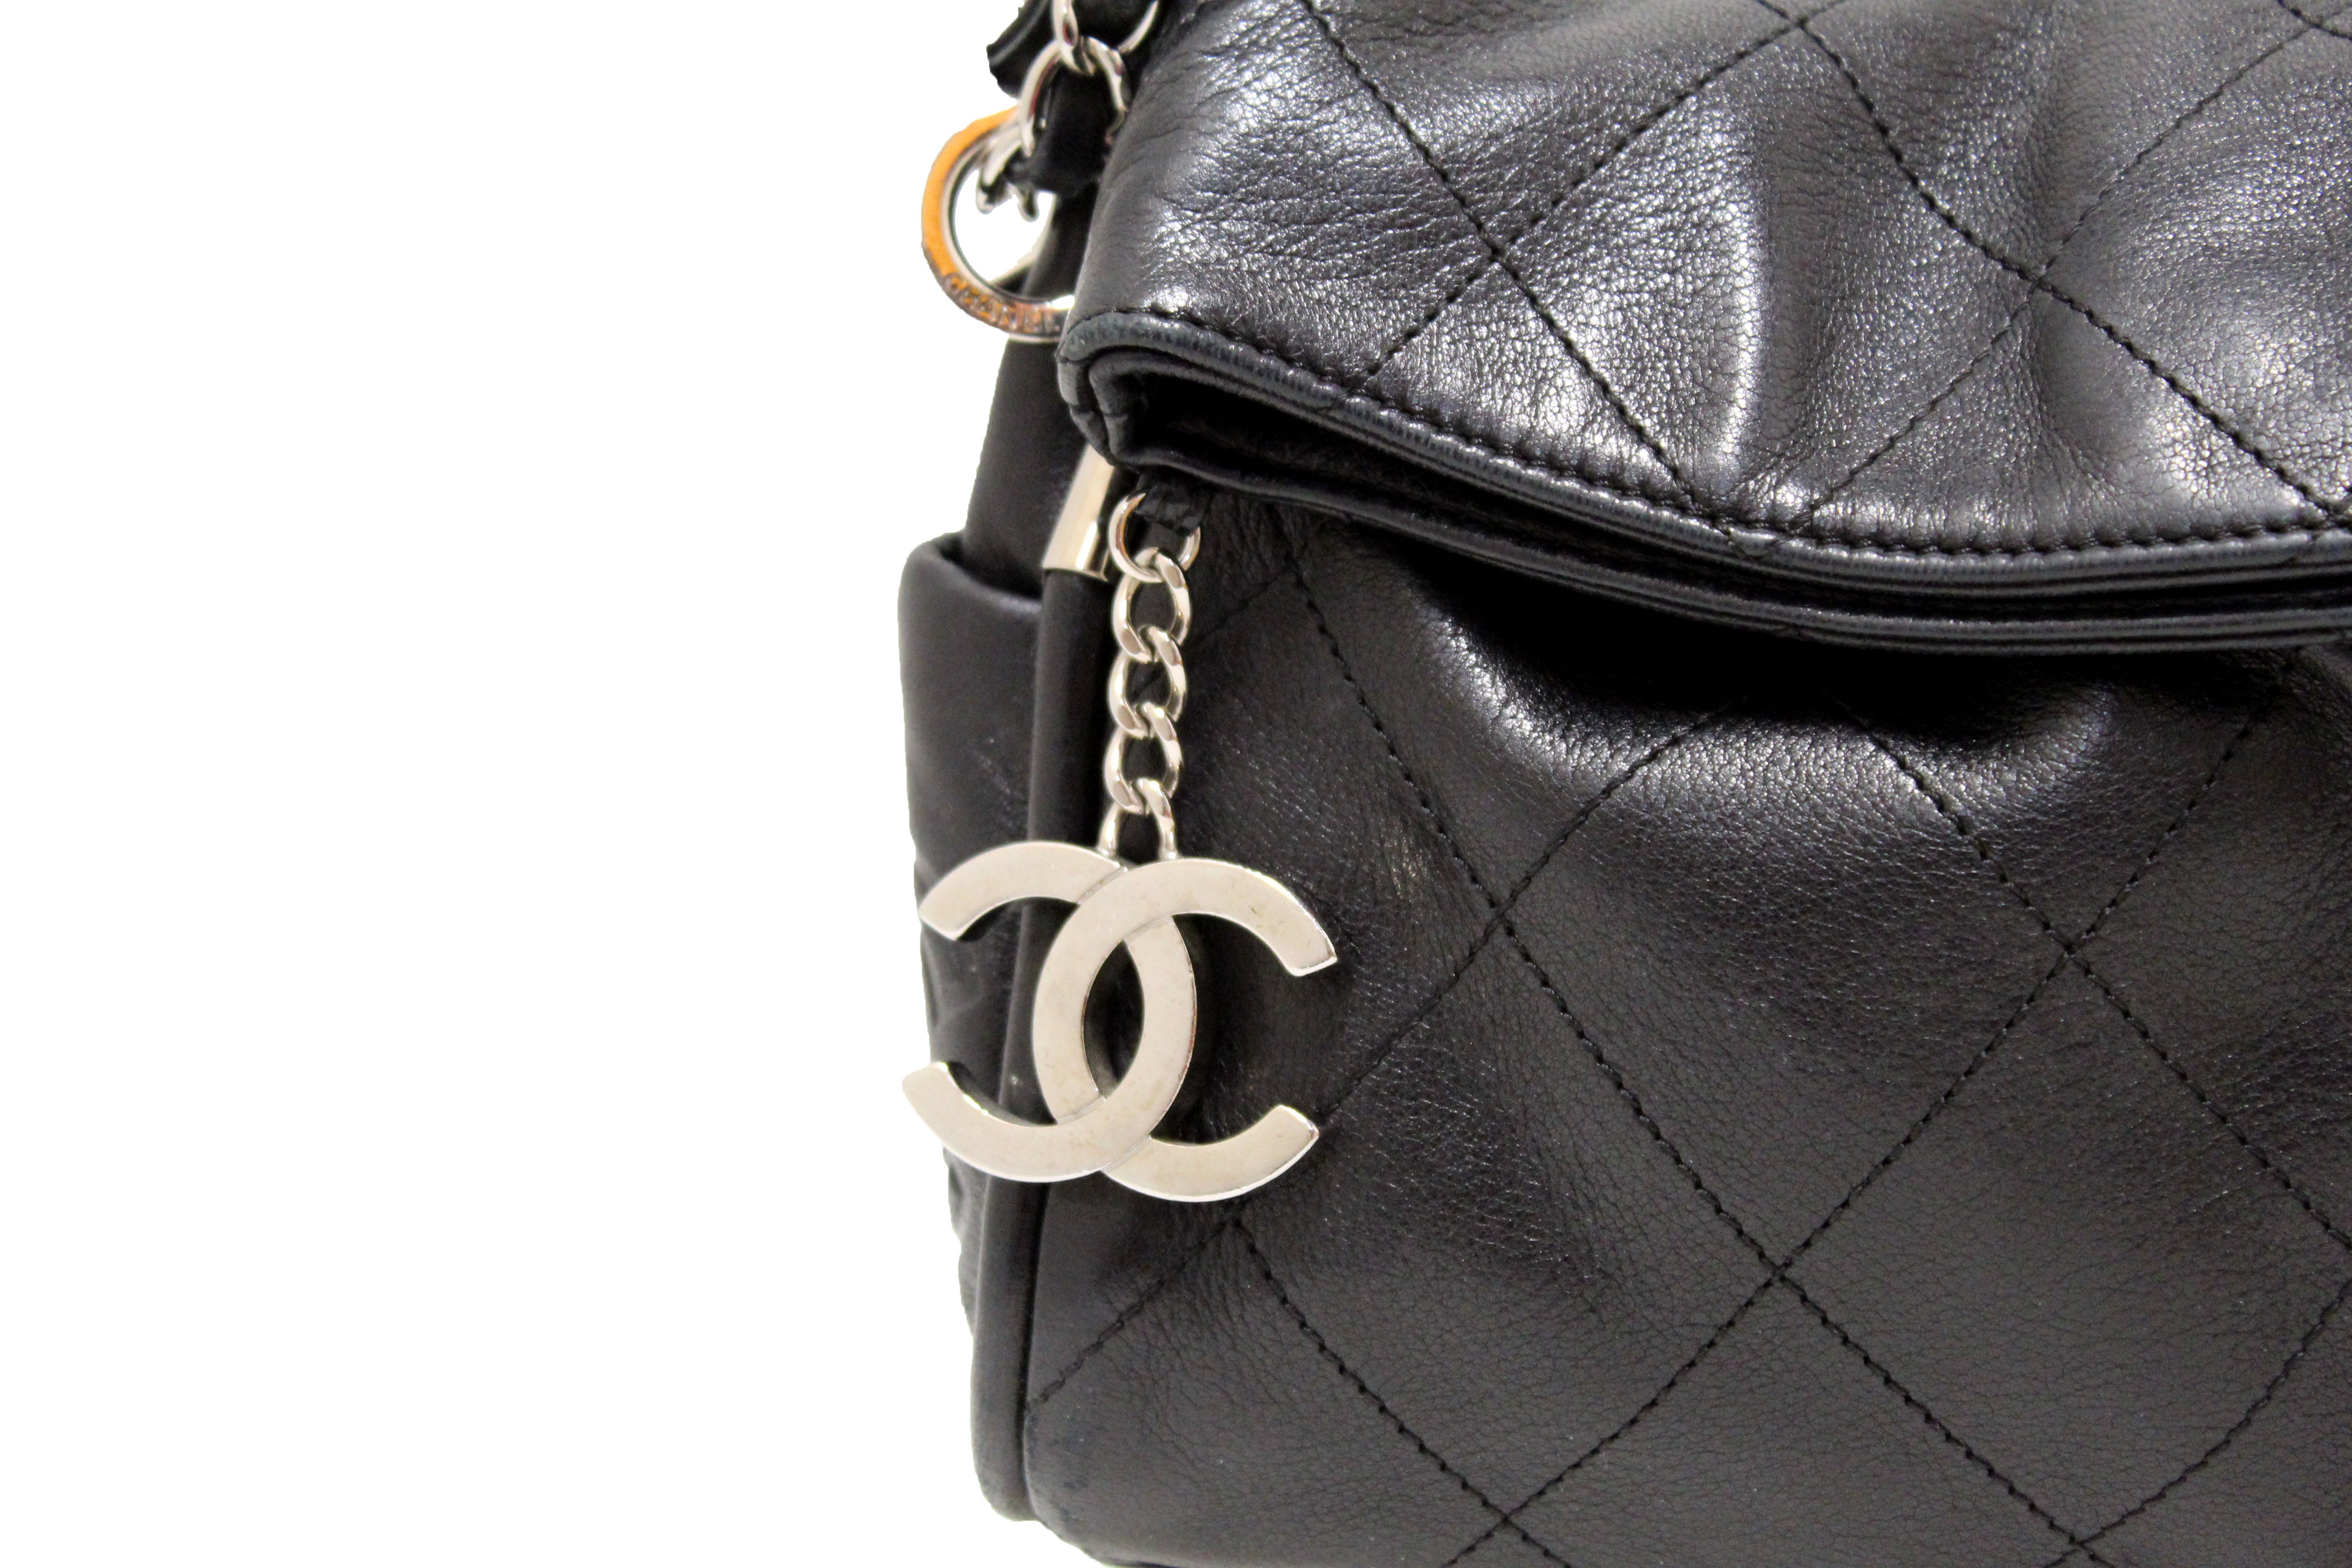 CHANEL Quilted Soft Leather Hobo Bag Black